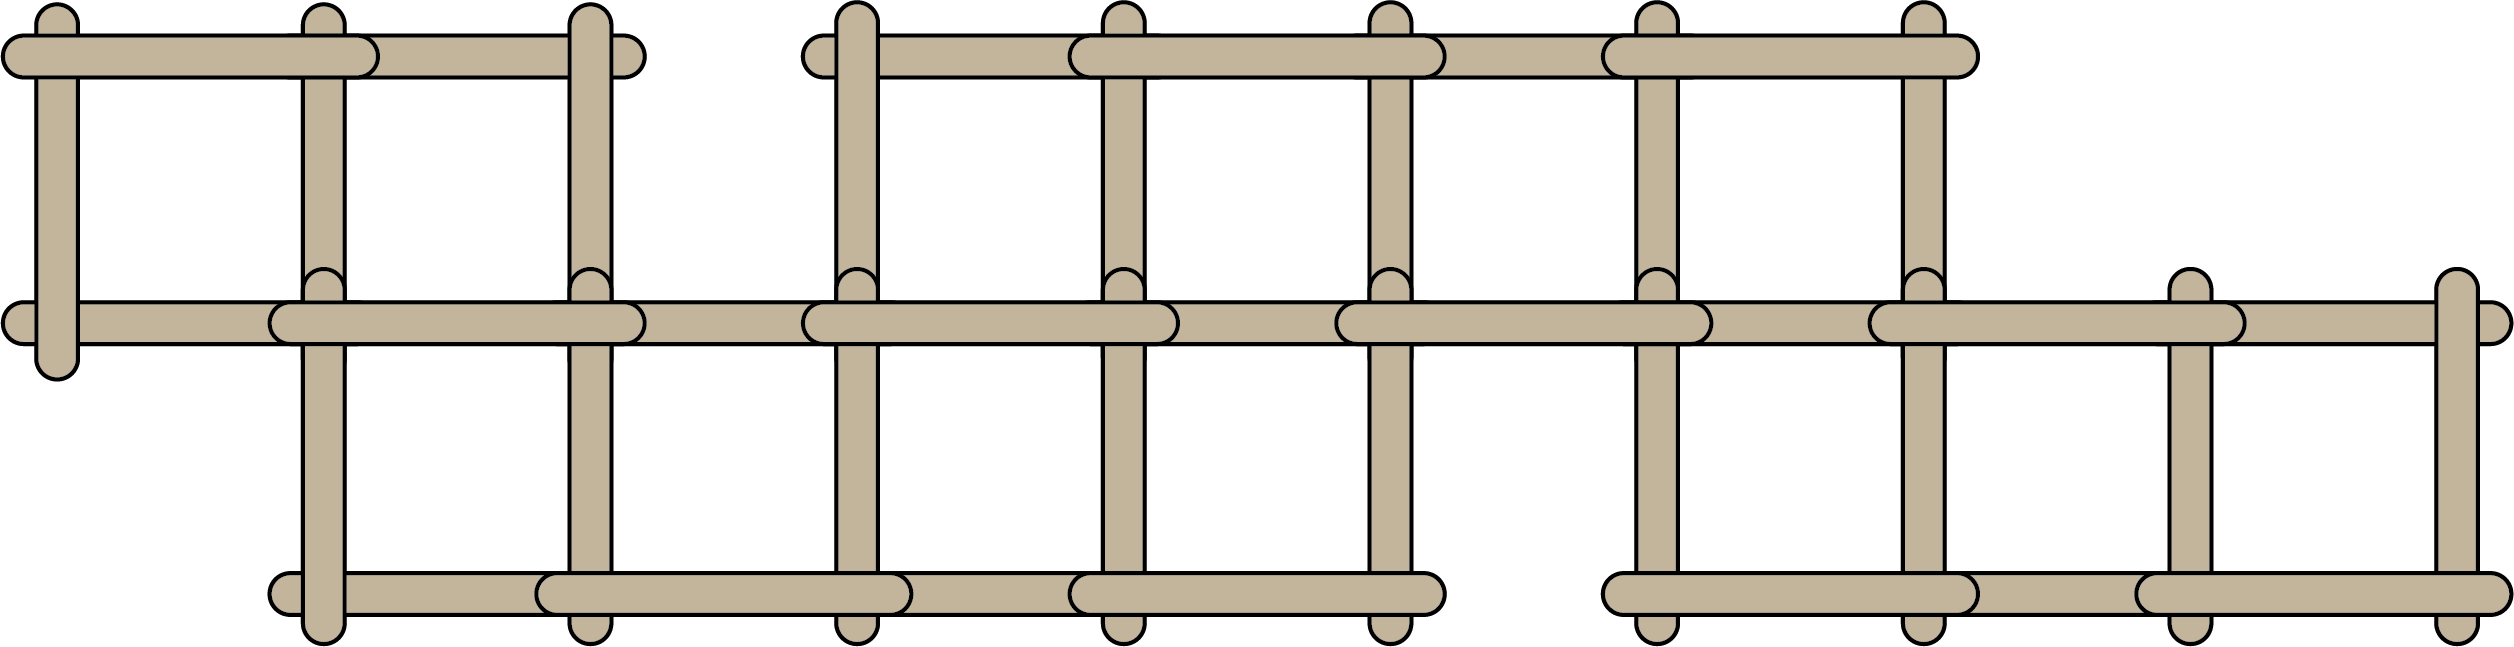 12 sticks, with 6 placed horizontally and 6 placed vertically, form a 2 by 2 grid of squares. A chain of four squares is added on the left edge of the grid, with 3 extra sticks used to make each square. A chain of five squares is added on the right edge of the grid, with 3 extra sticks used to make each square.